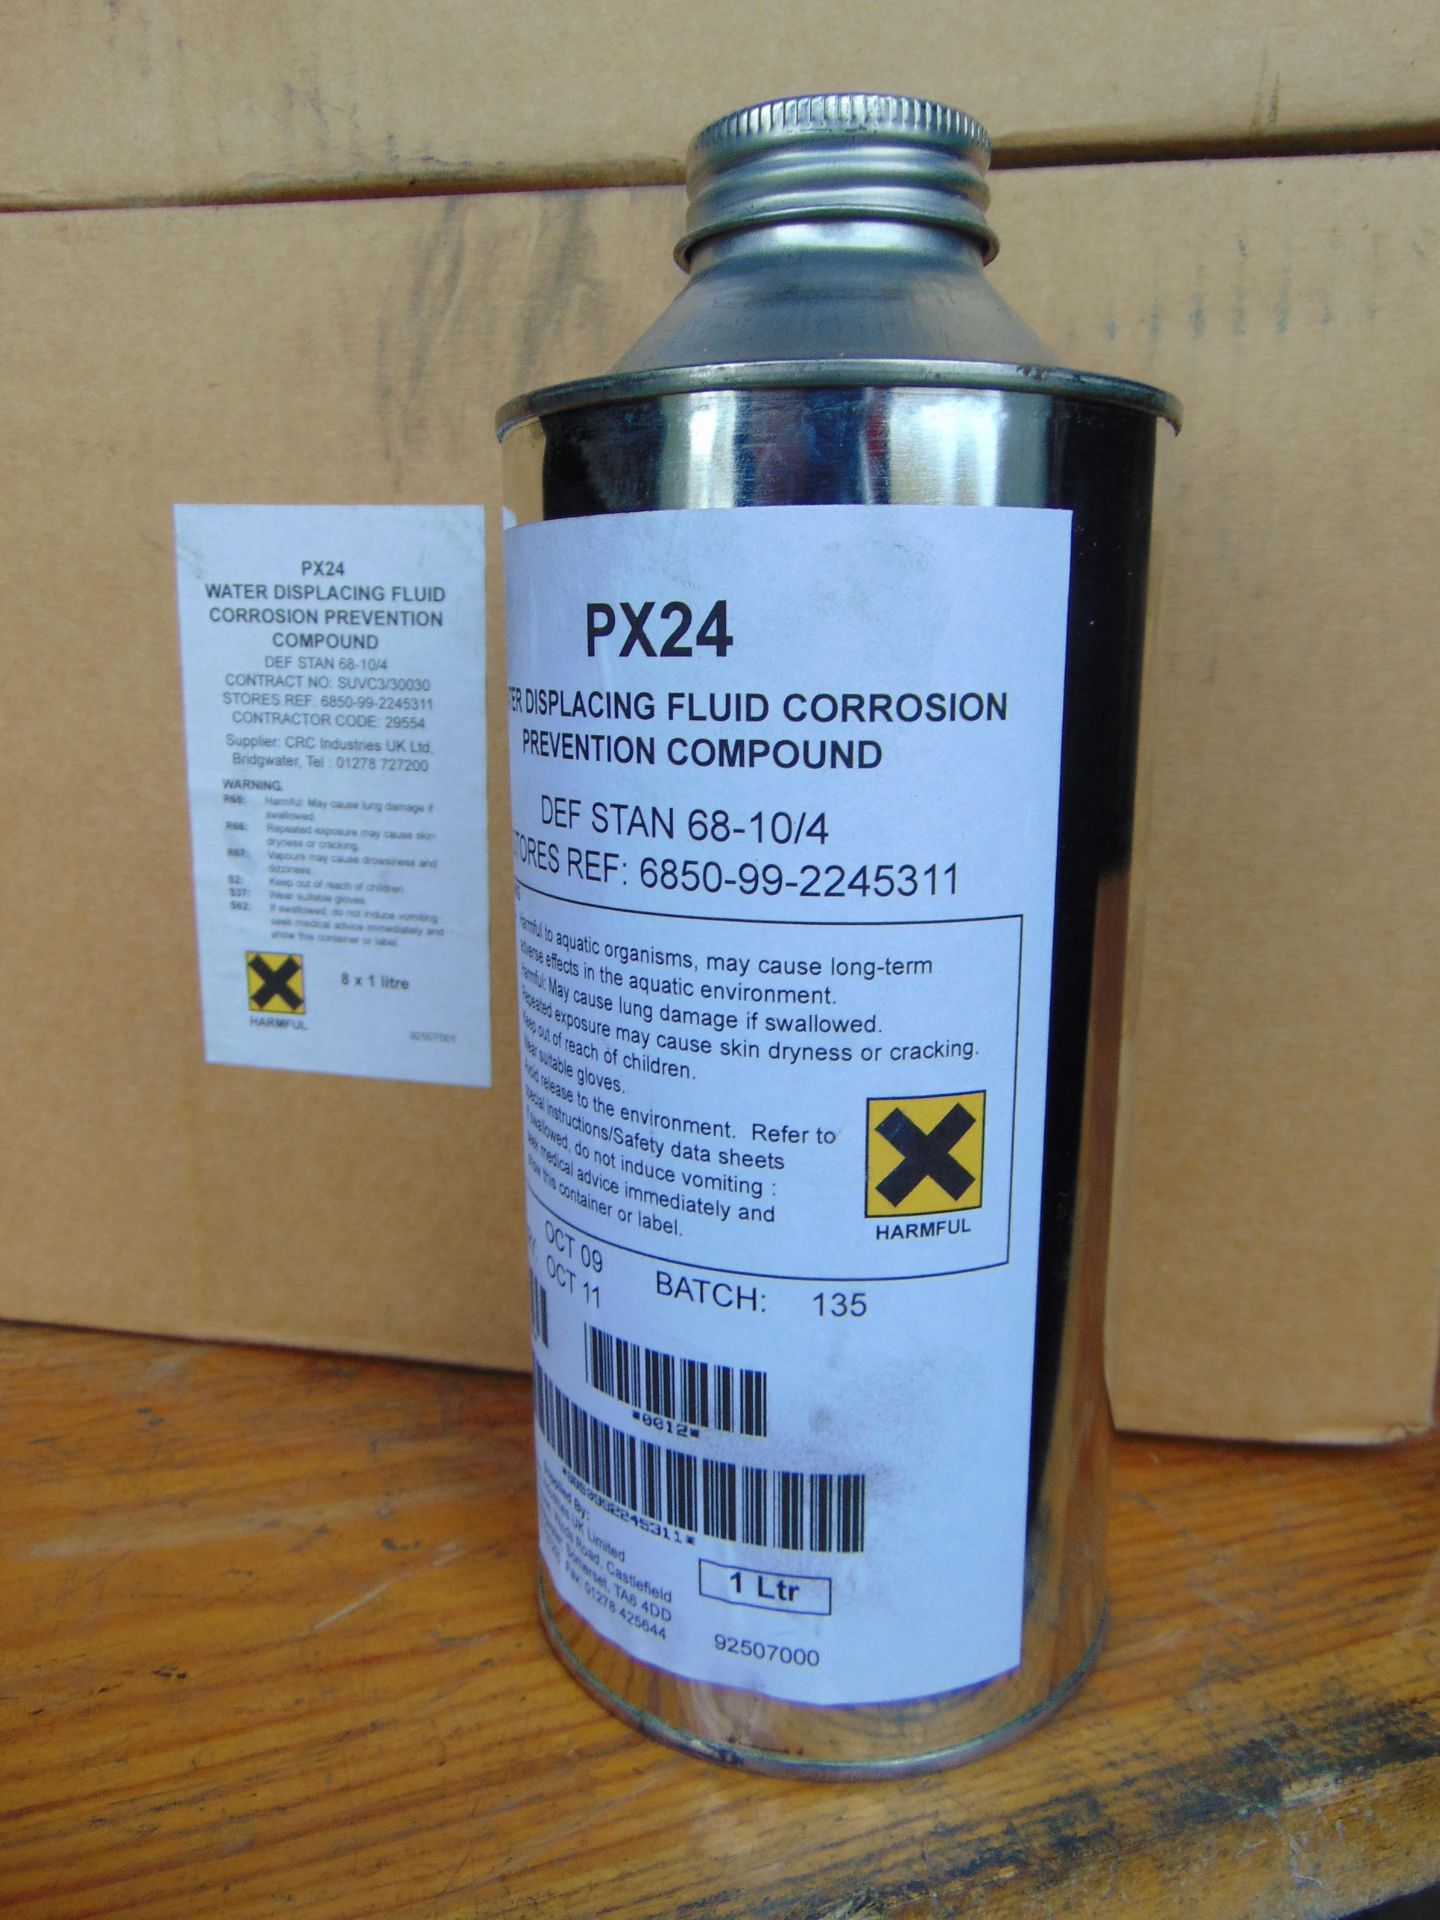 8 x 1 Ltr Bottles of PX24 Water Displacing Fluid Corrosion Prevention Compound - Image 3 of 6